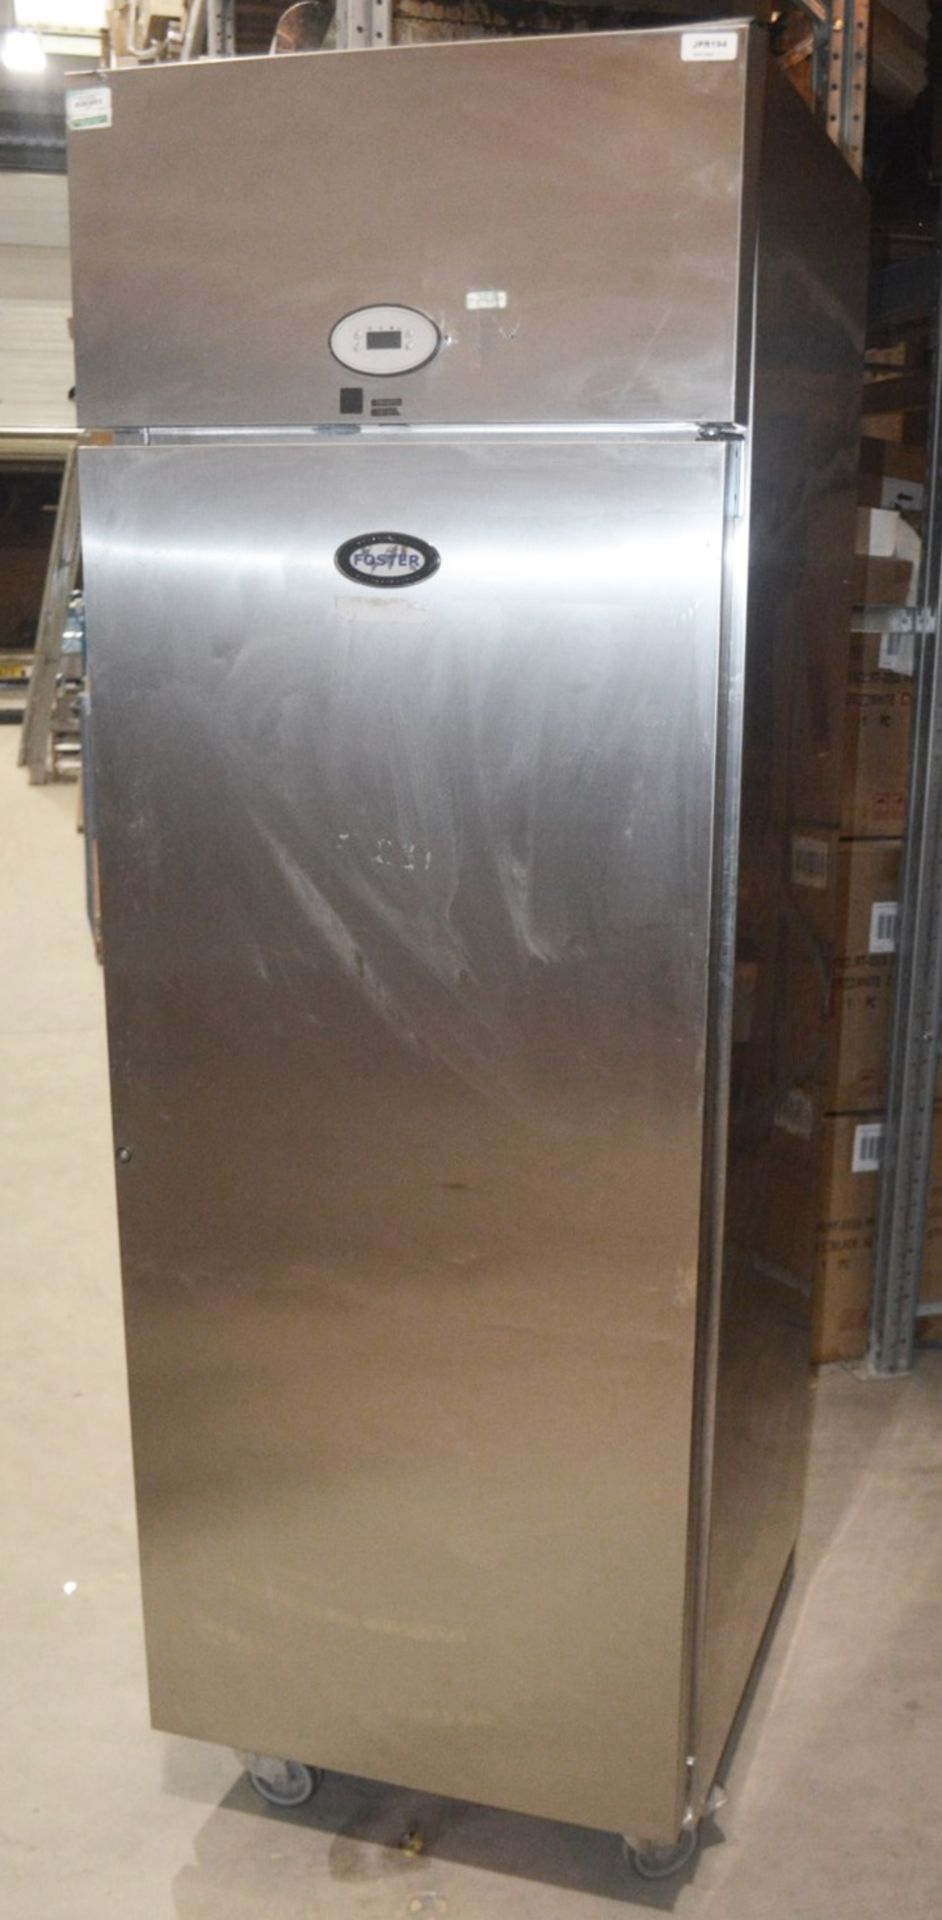 1 x FOSTER Stainless Steel Commercial Upright Freezer (PROG600L) - Dimensions: H208 x W70 x